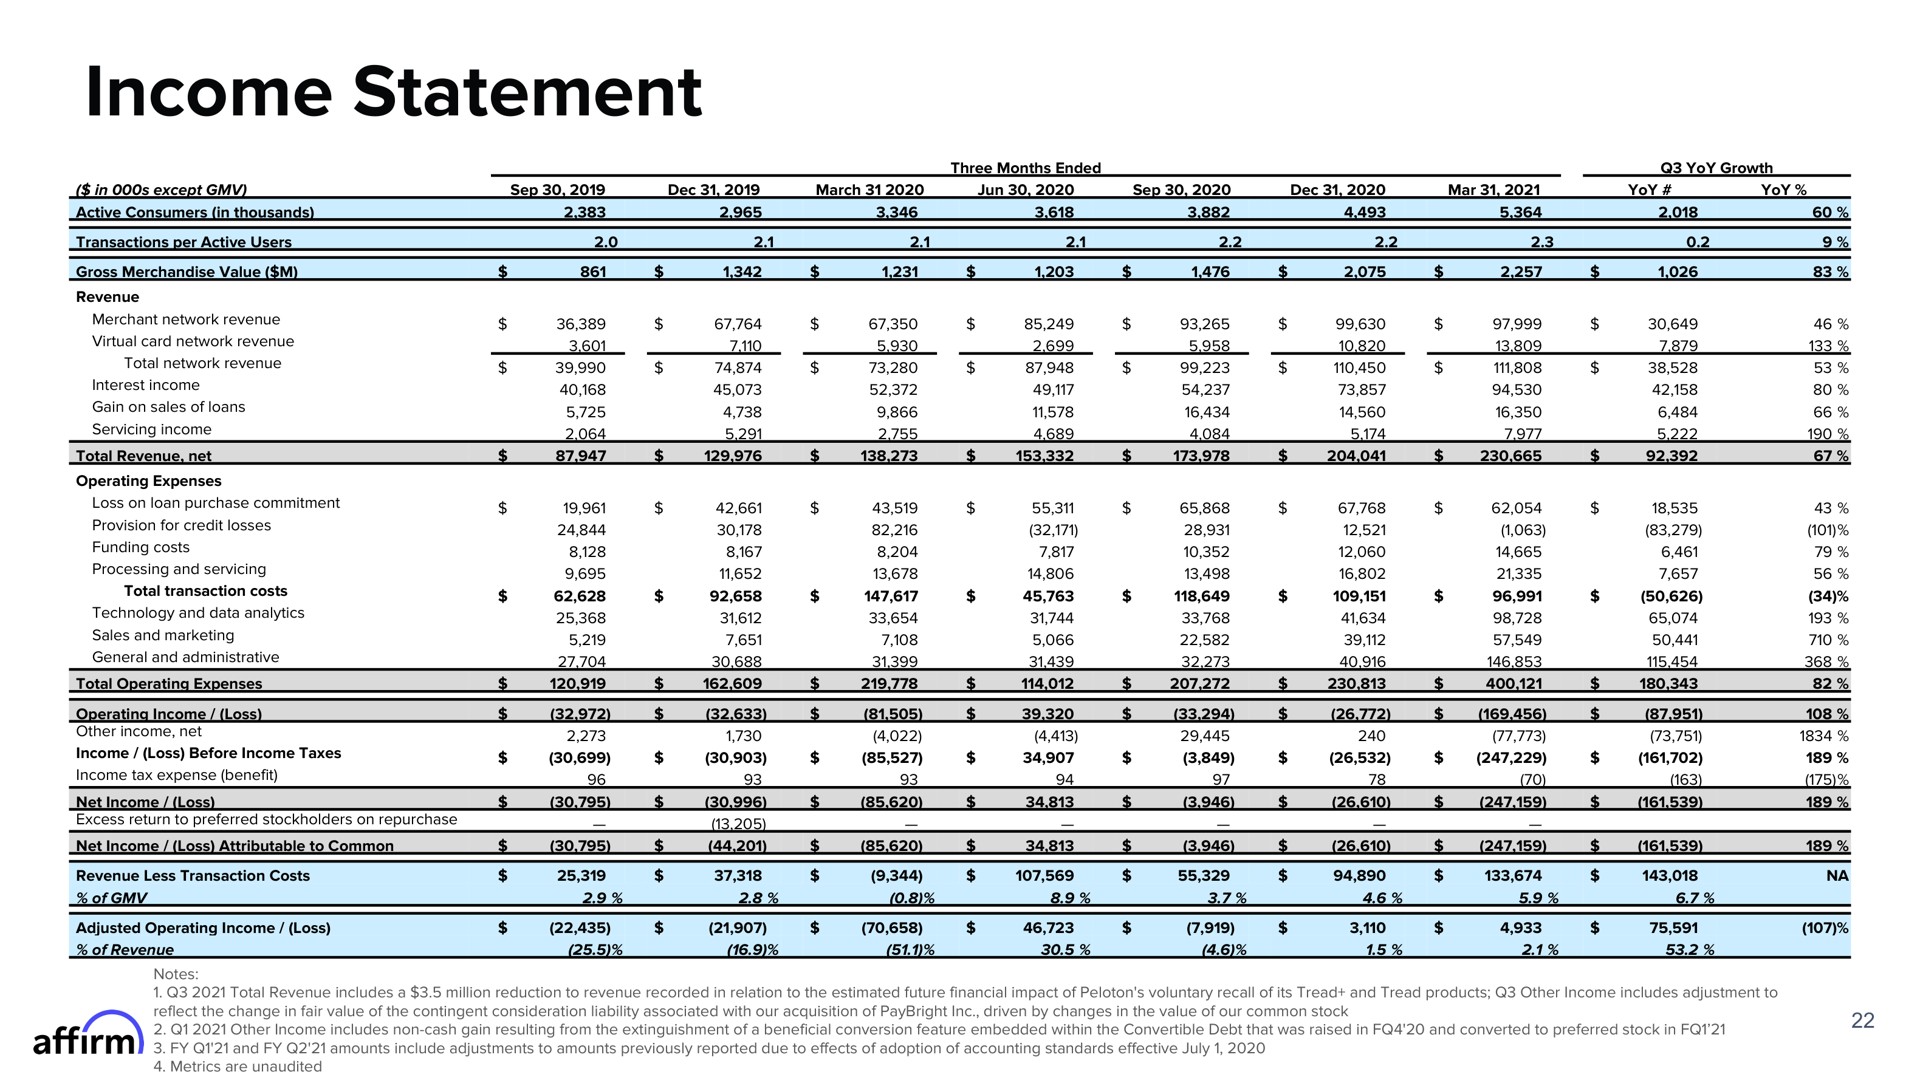 income statement | Affirm